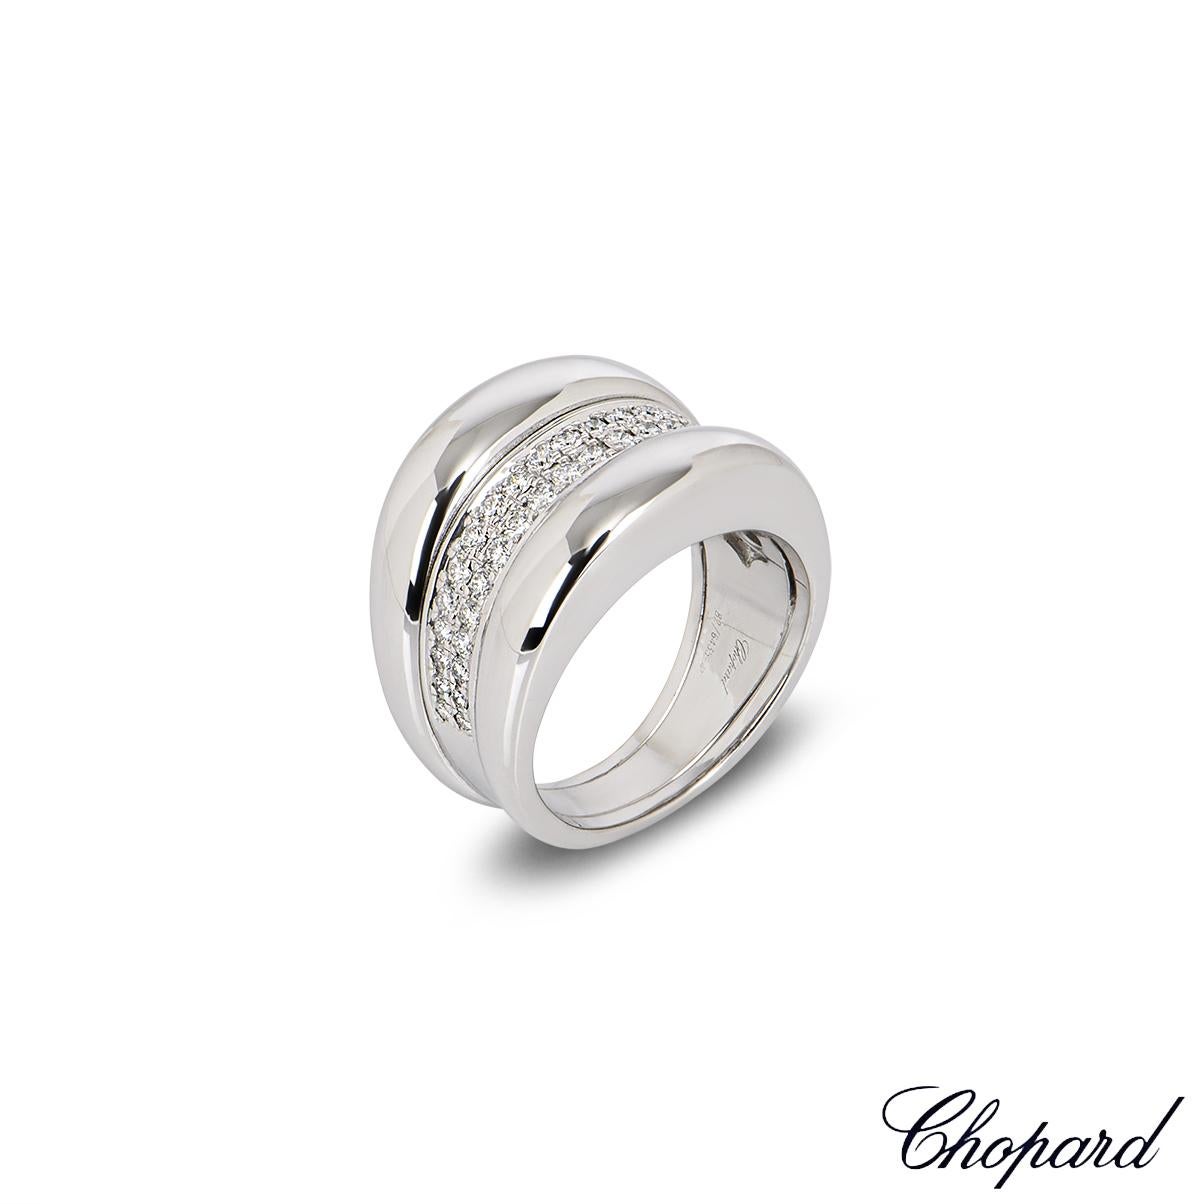 A dazzling Chopard 18k white gold diamond ring from the La Strada collection. The ring is set to the centre with two rows of 42 pave set round brilliant cut diamonds totalling 0.62ct surrounded by a raised domed border on either side. The ring is